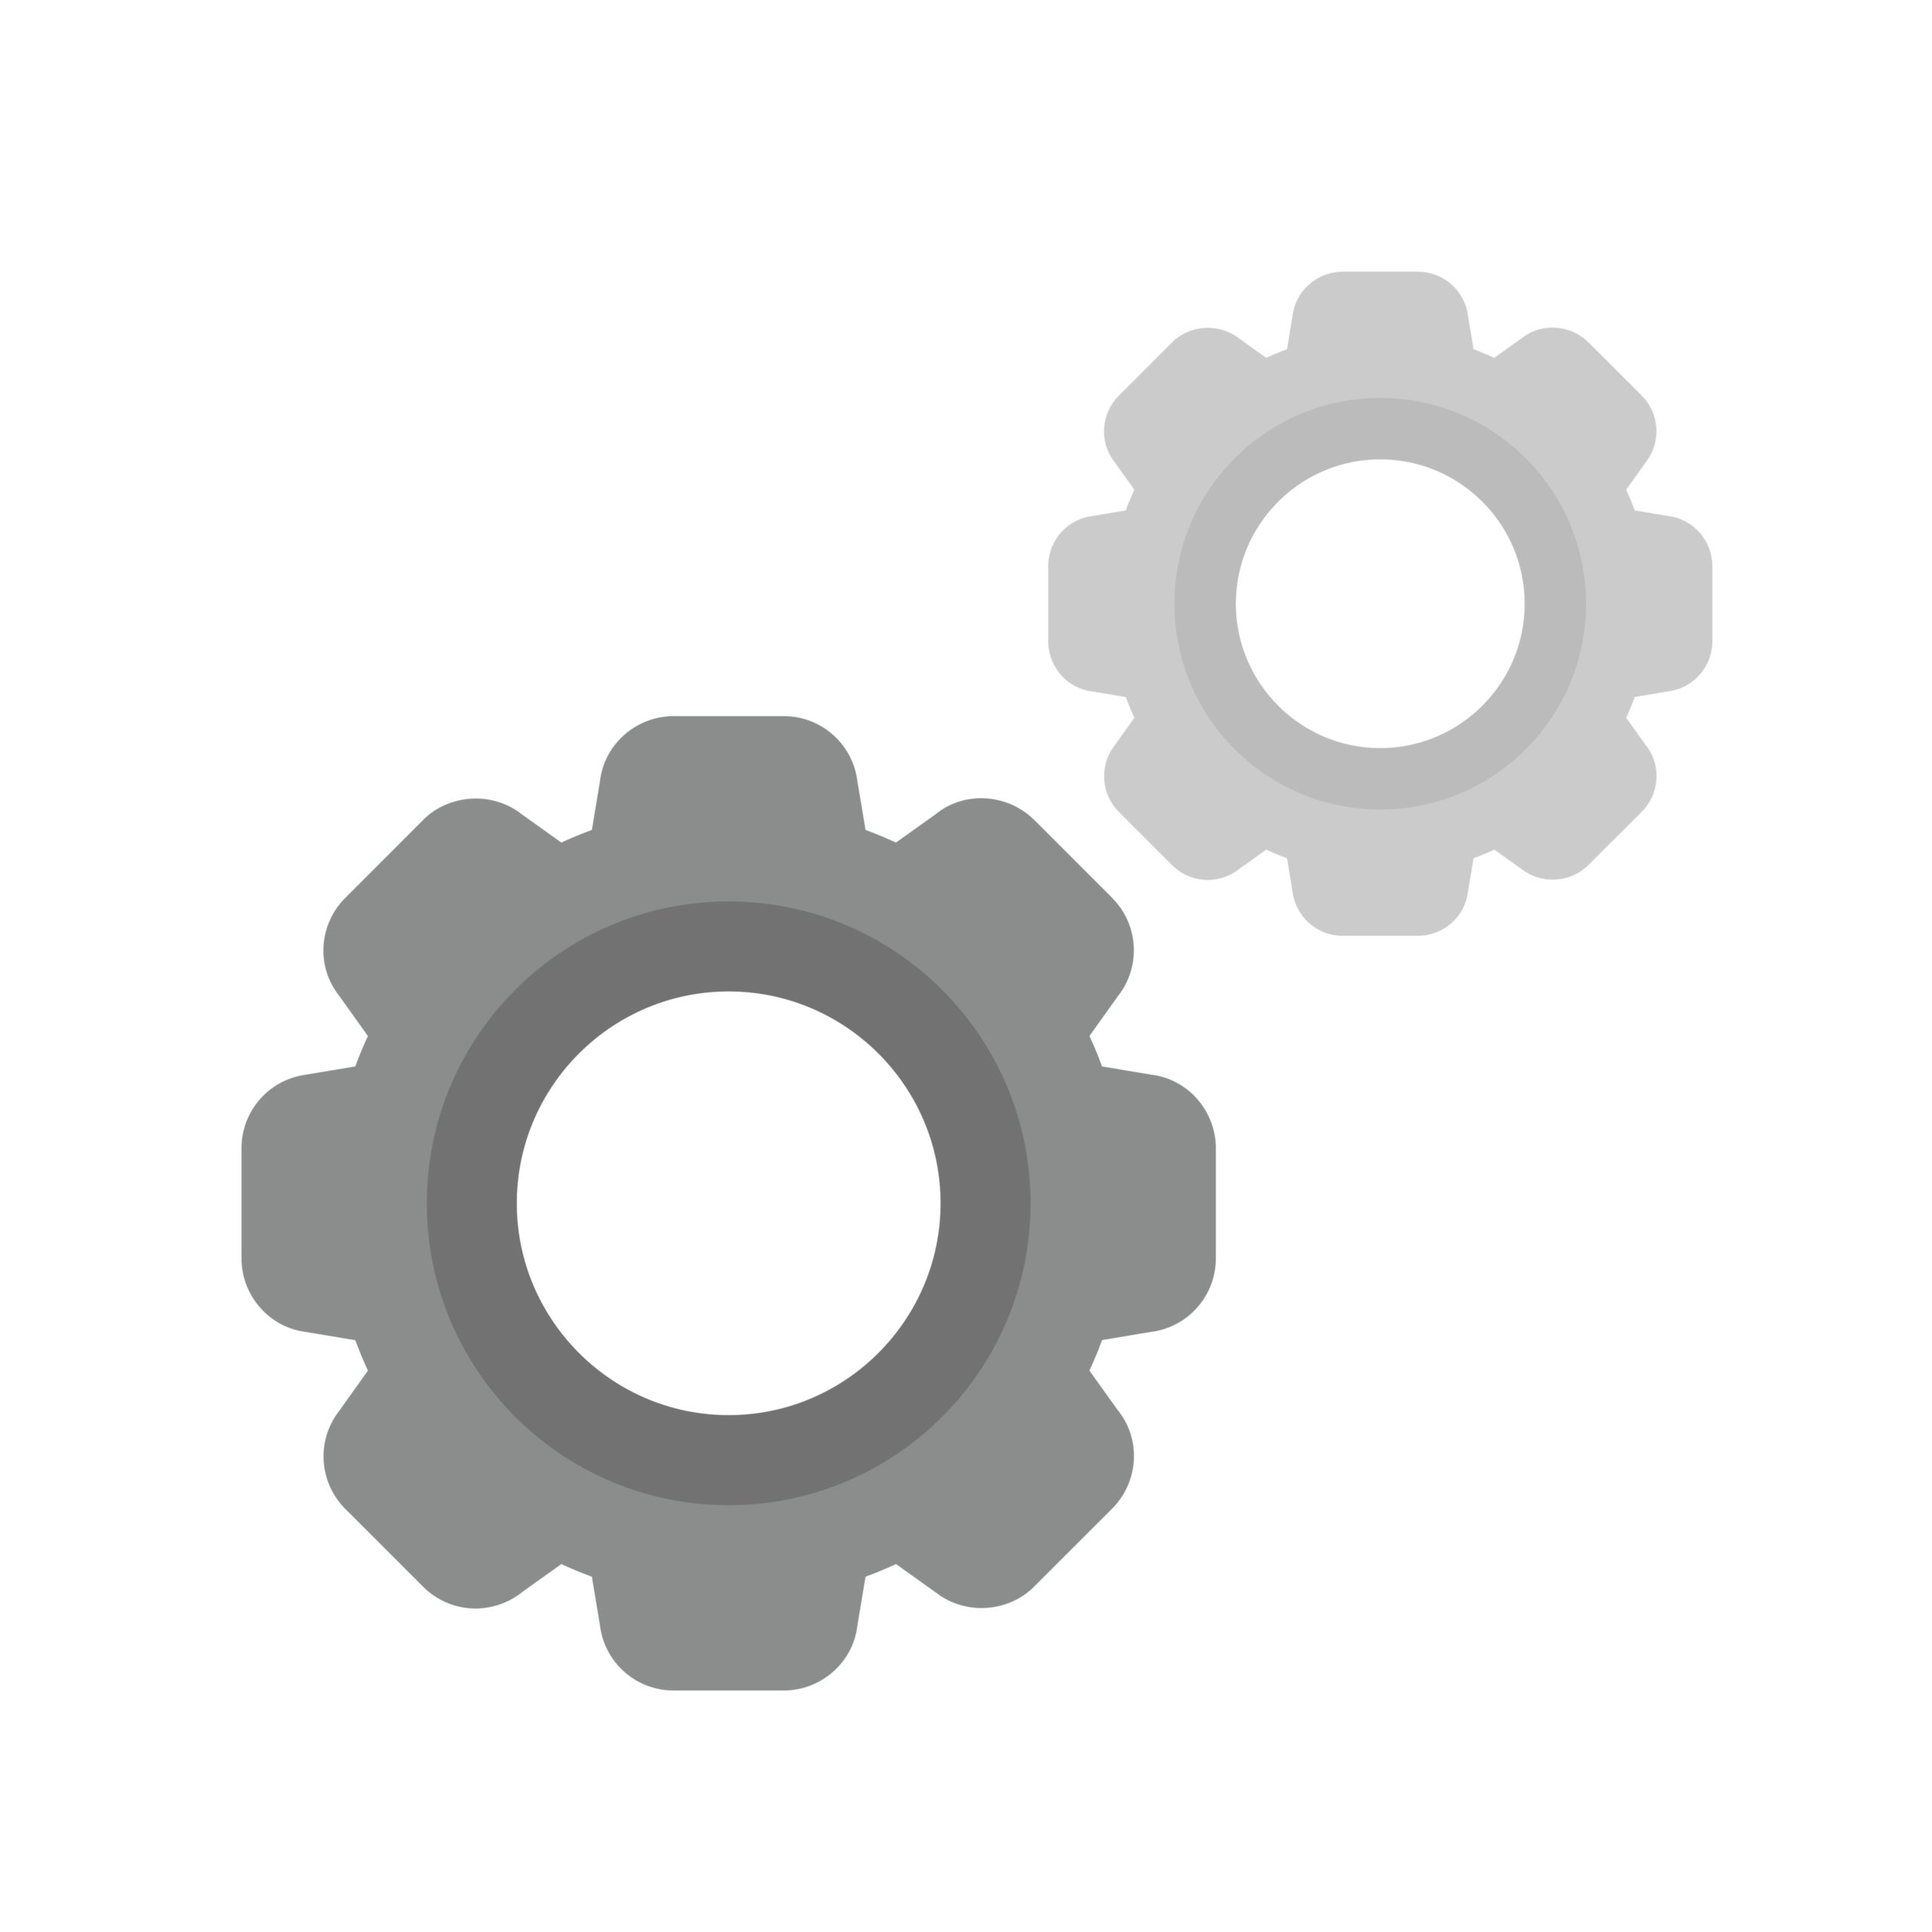 Gear, control, settings icon vector image. Can also be used for business management. Suitable for use on web apps, mobile apps and print media.